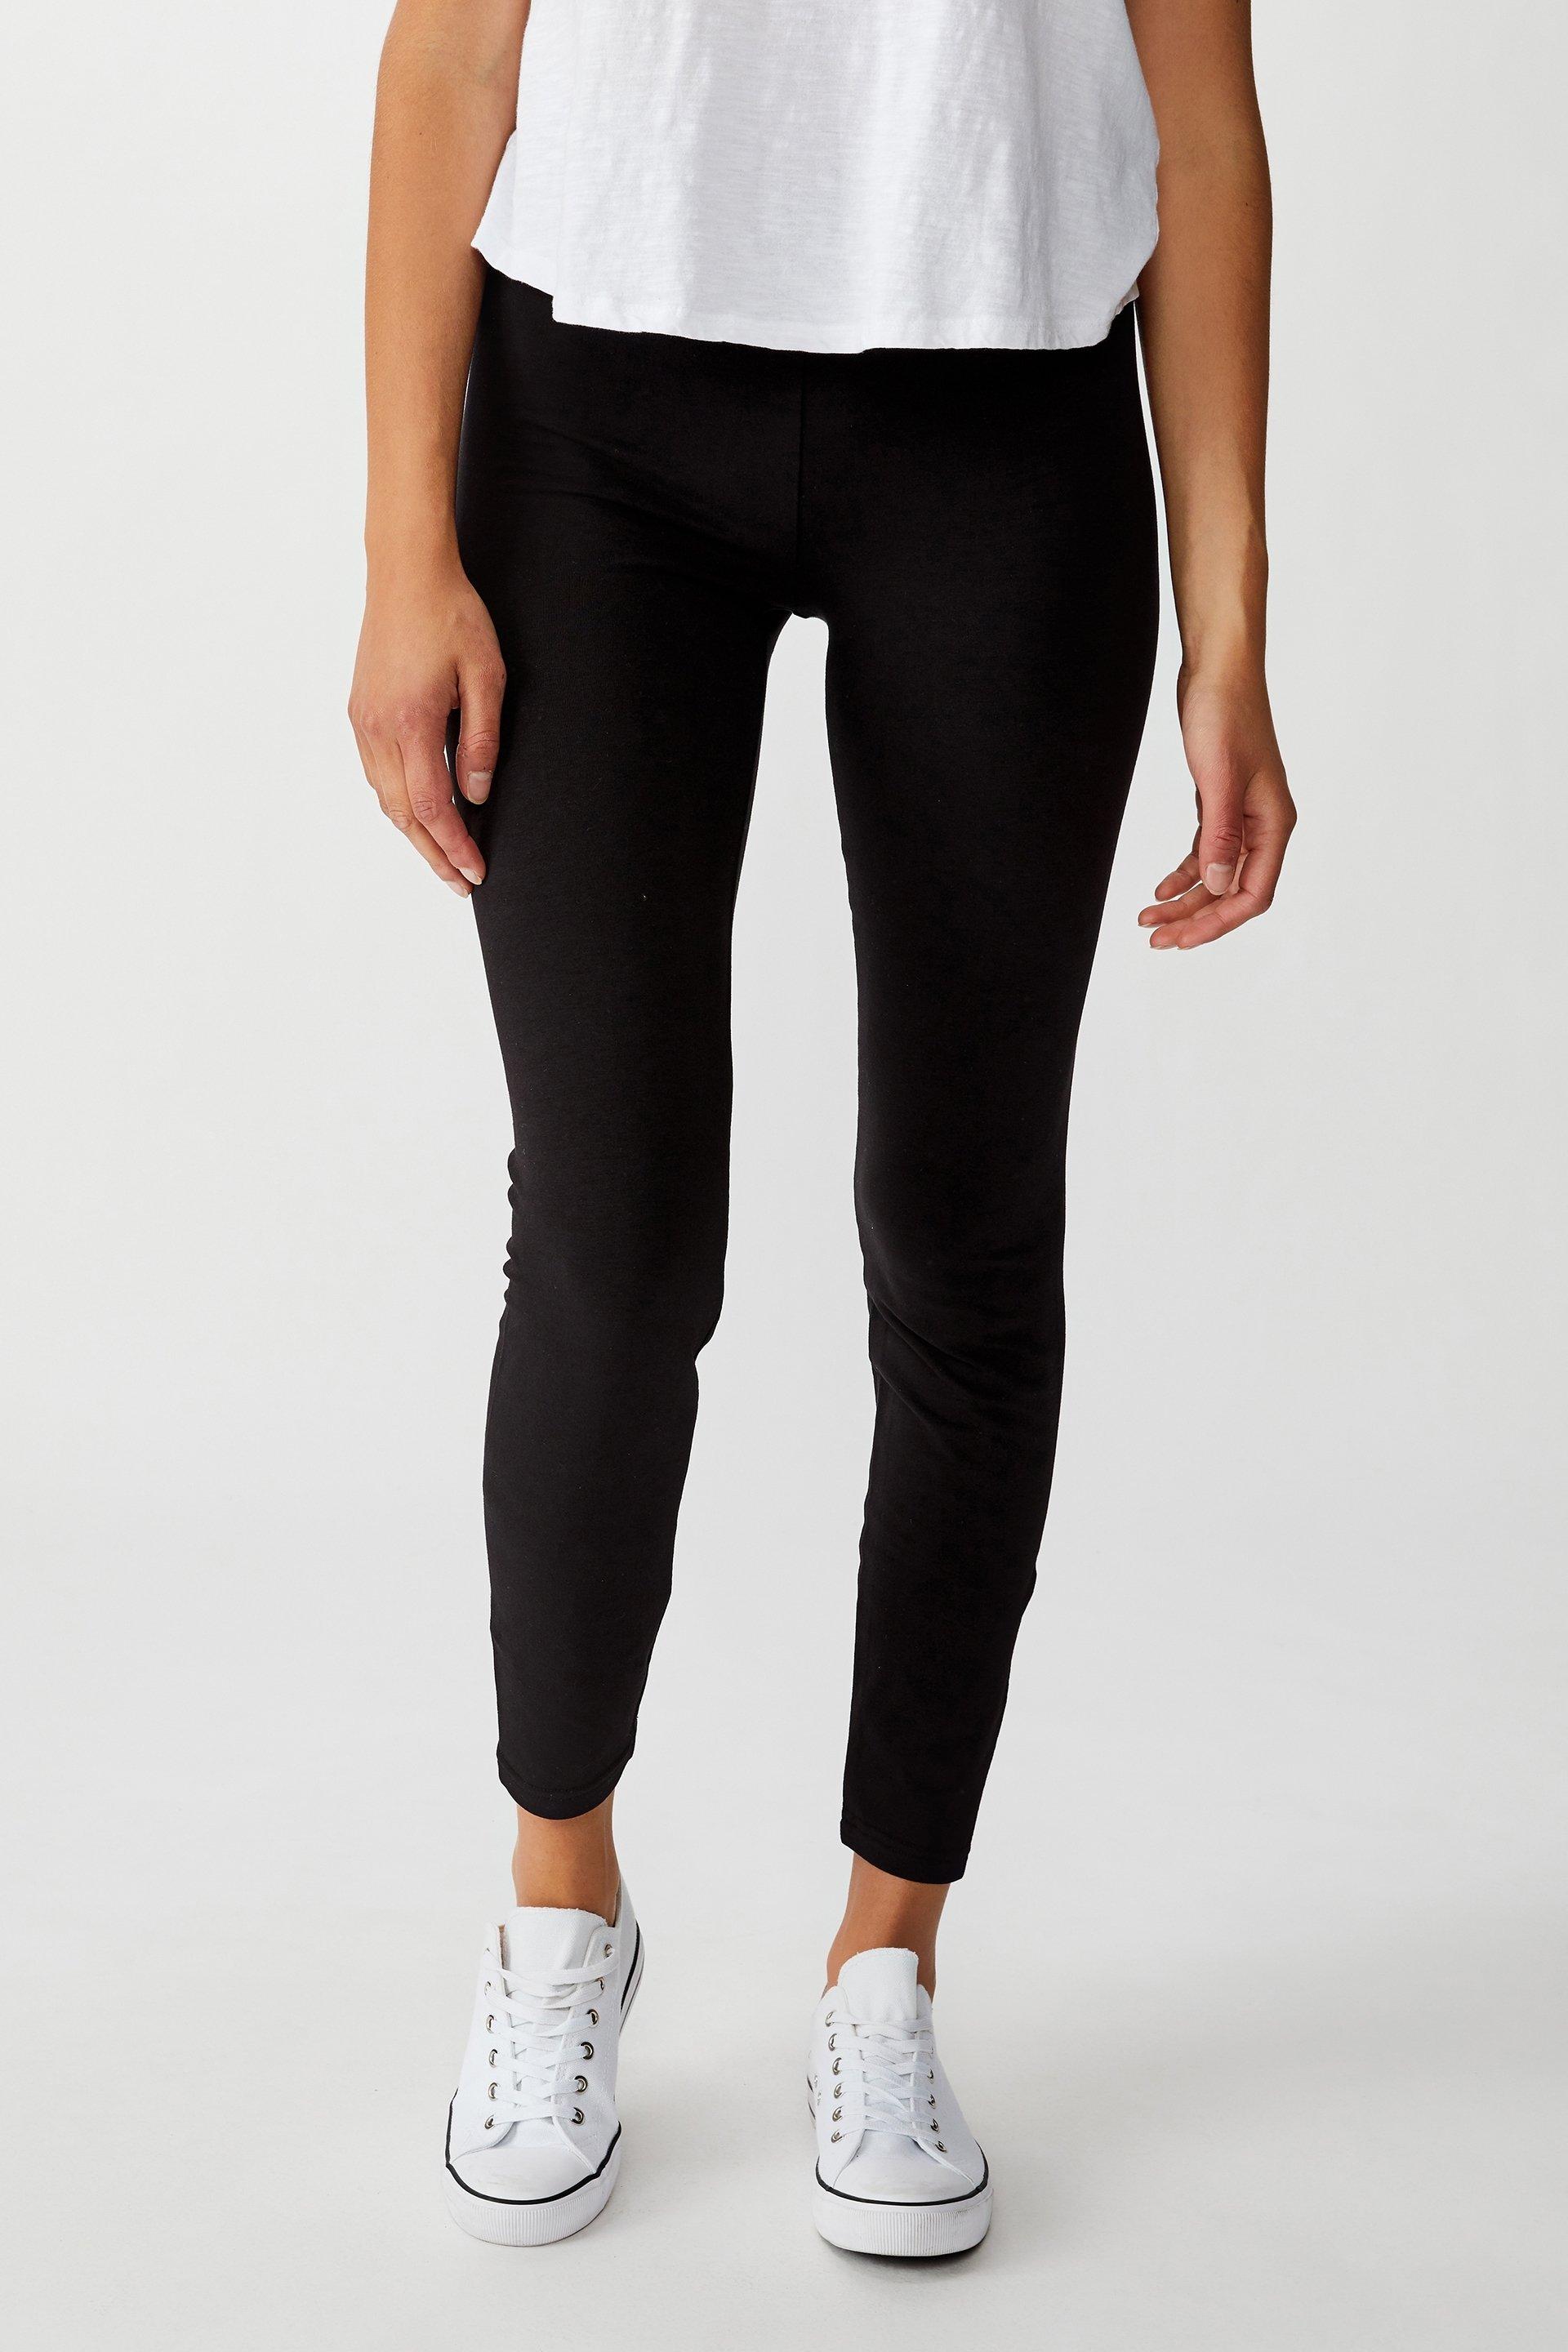 Black Leggings Cotton On Body  International Society of Precision  Agriculture